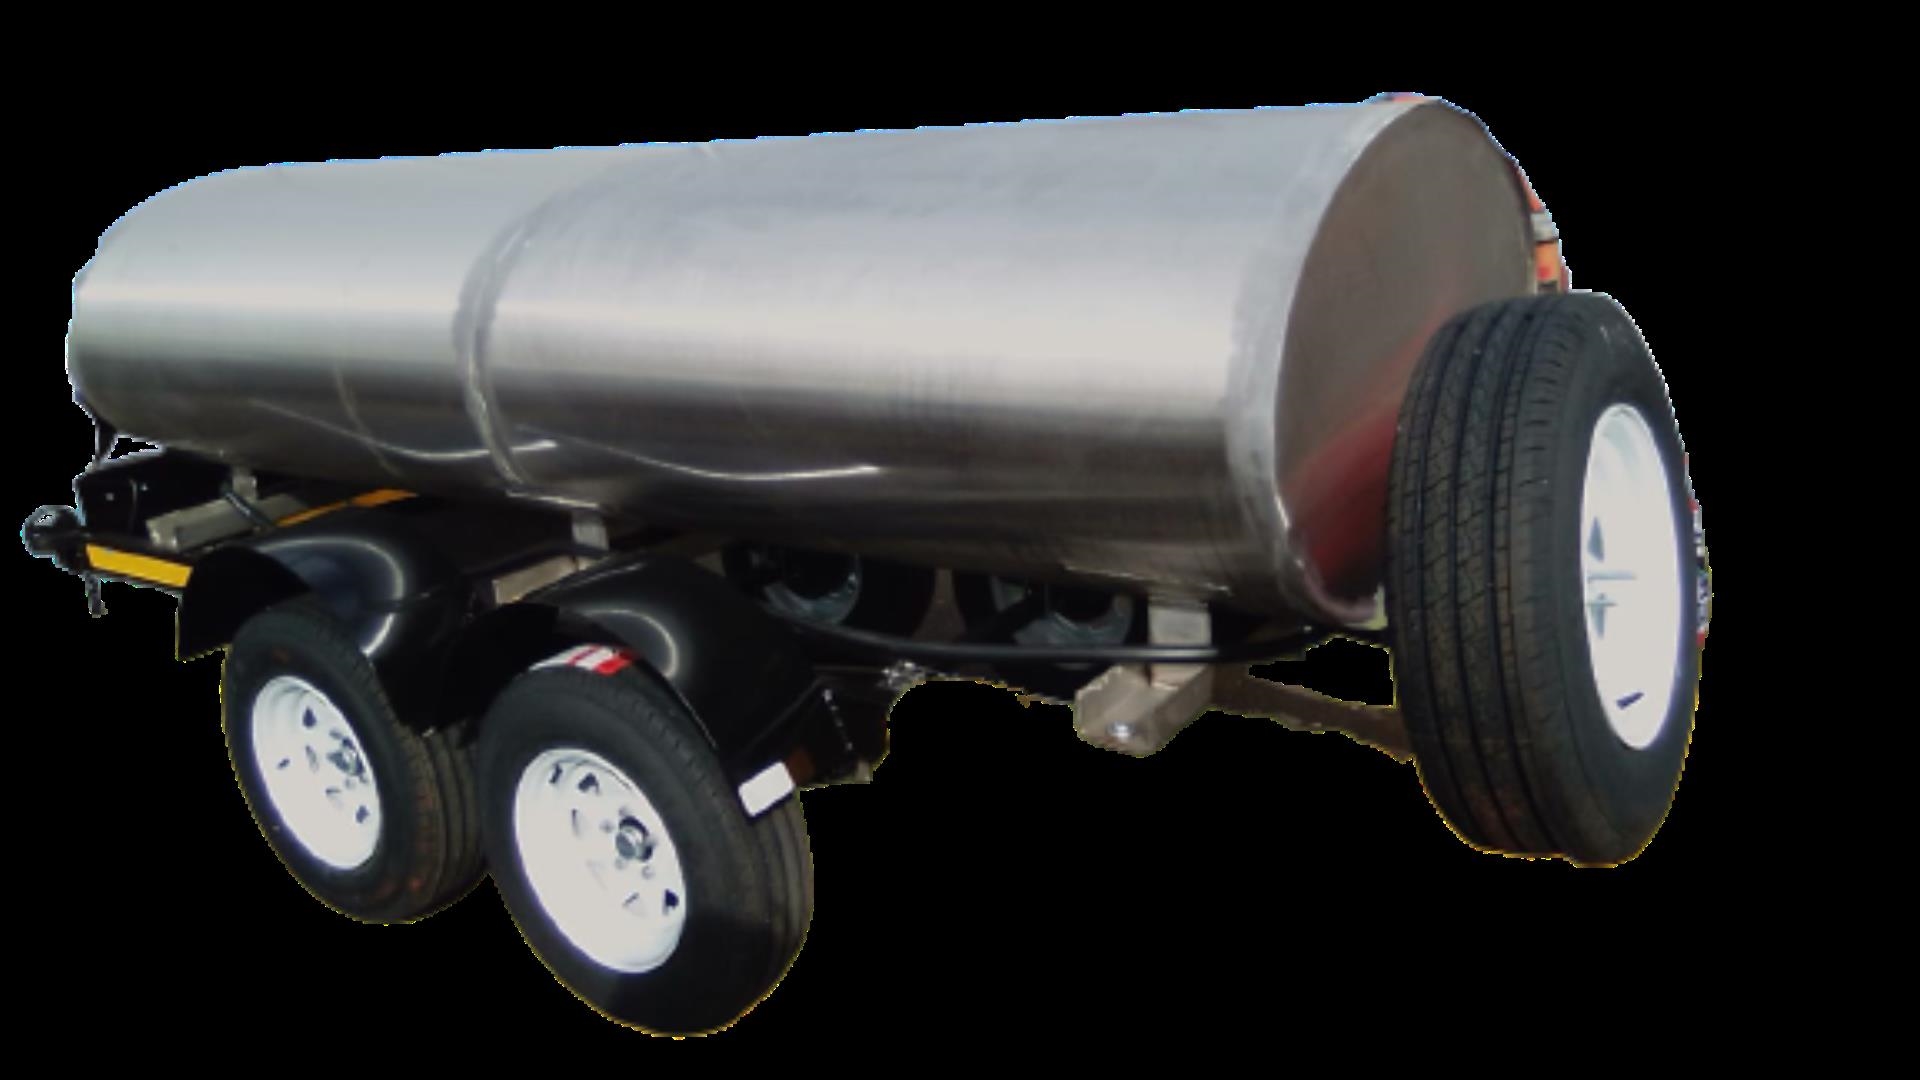 Custom Trailers 2000 Litre Stainless Steel Bowser FOR PETROL/AVGAS 2022 for sale by Jikelele Tankers and Trailers   | Truck & Trailer Marketplaces